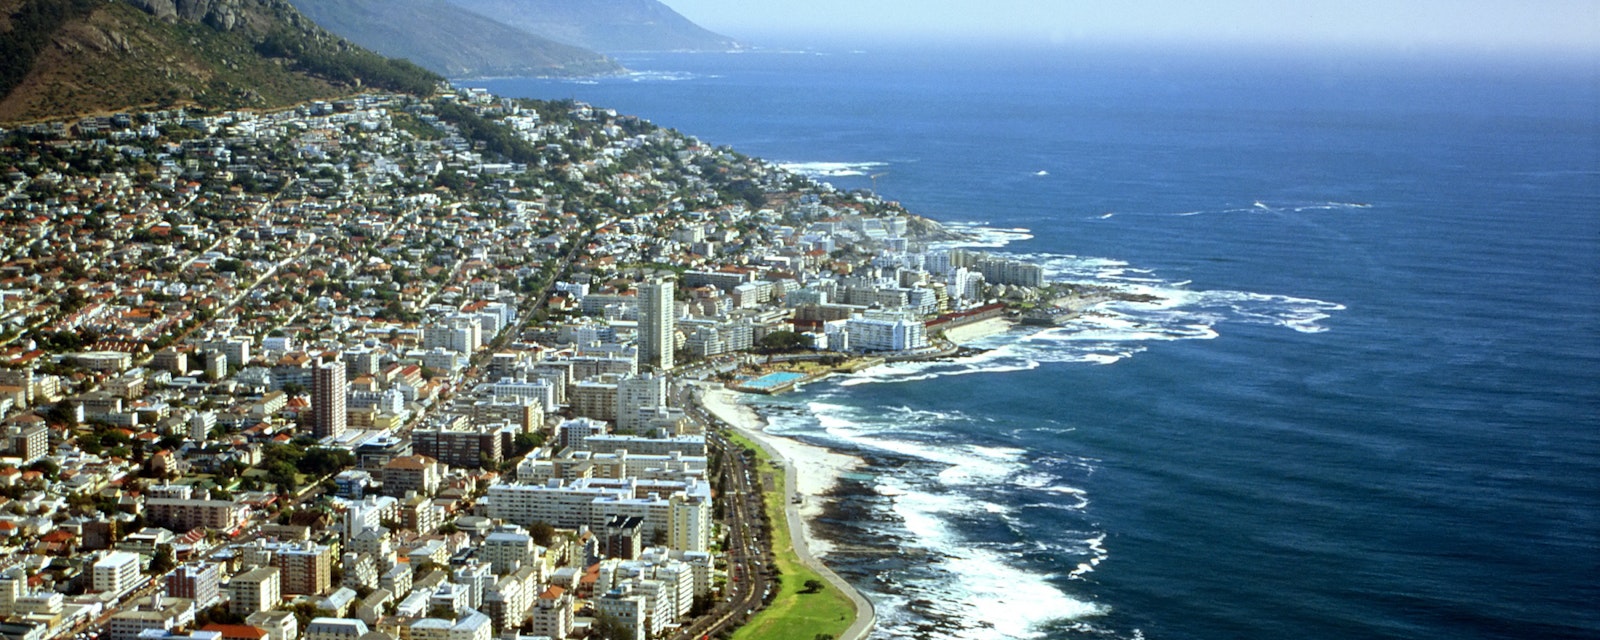 Cape,Town,-,South,Africa,-,Aerial,View